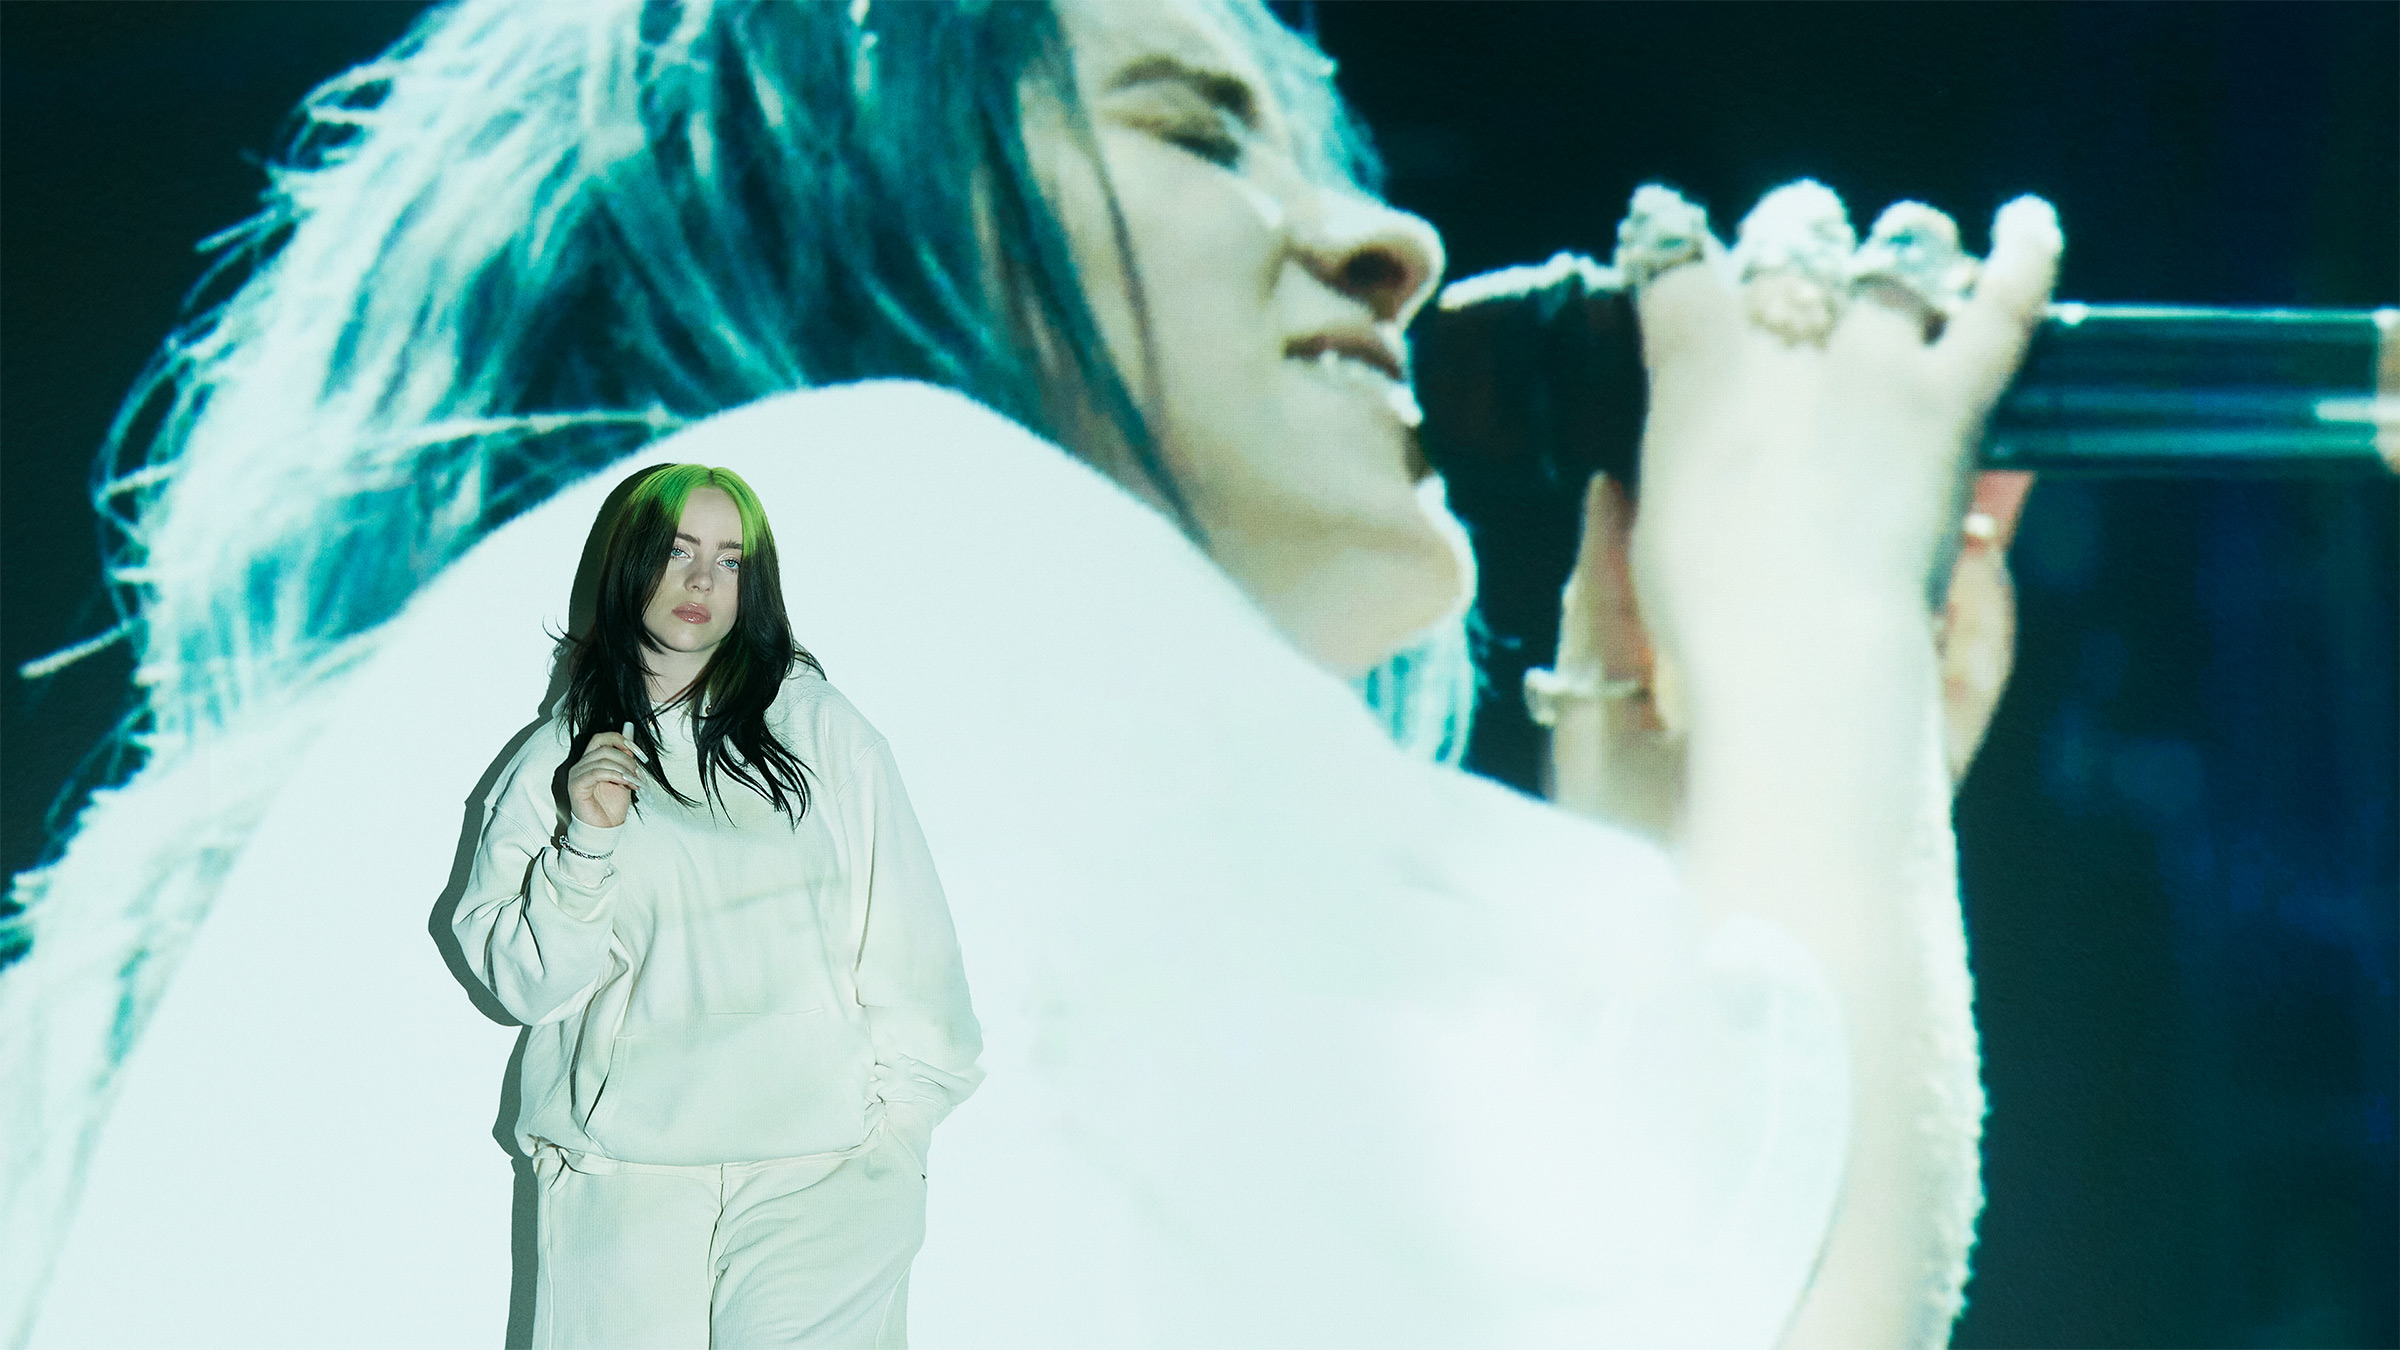 Art of the Cut: Capturing a Shooting Star in “Billie Eilish: The World’s a Little Blurry”